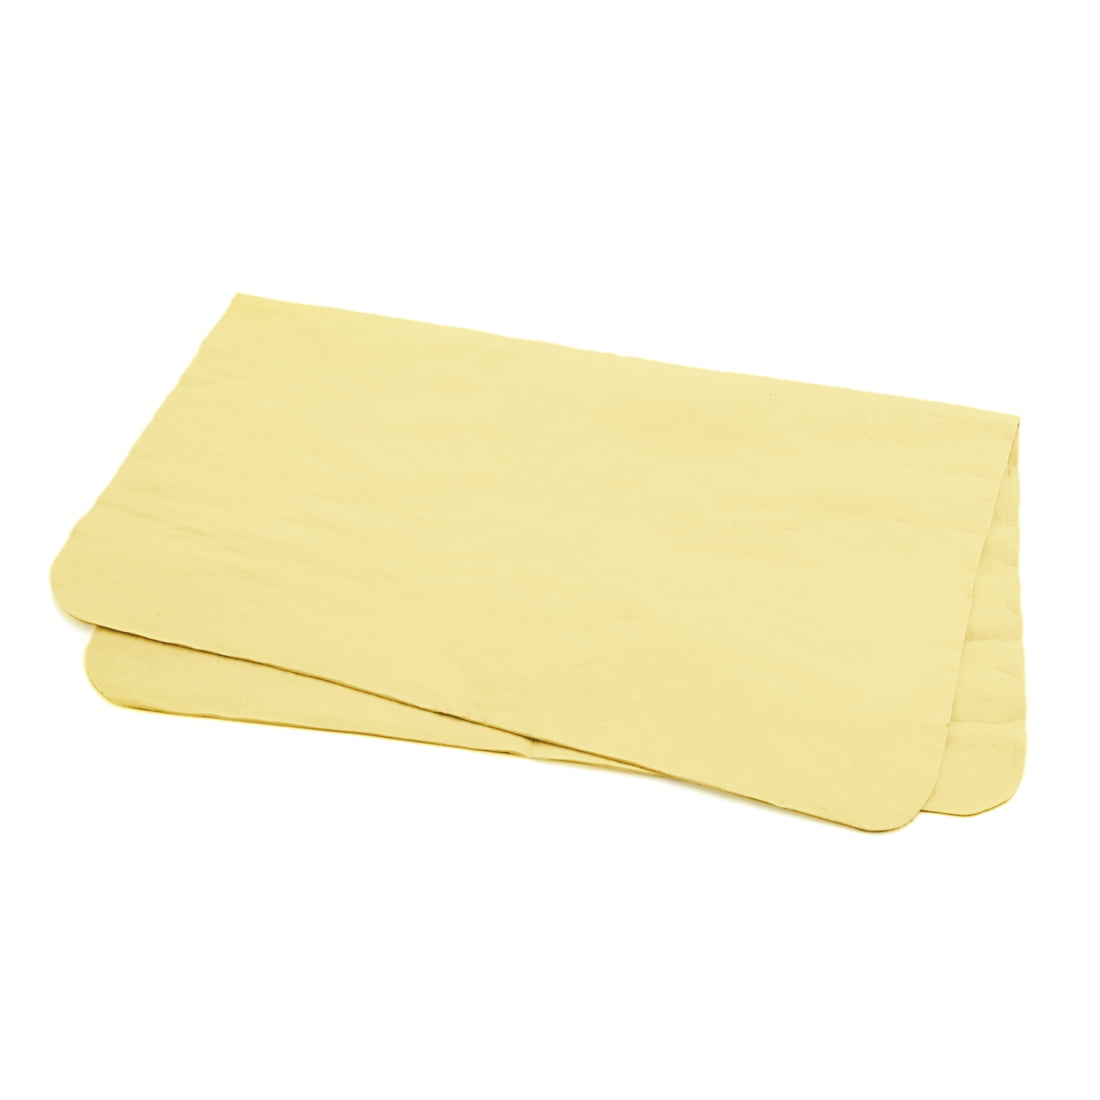 Natural Chamois Leather Car Cleaning Cloth Washing Absorbent Drying Towel Pop 